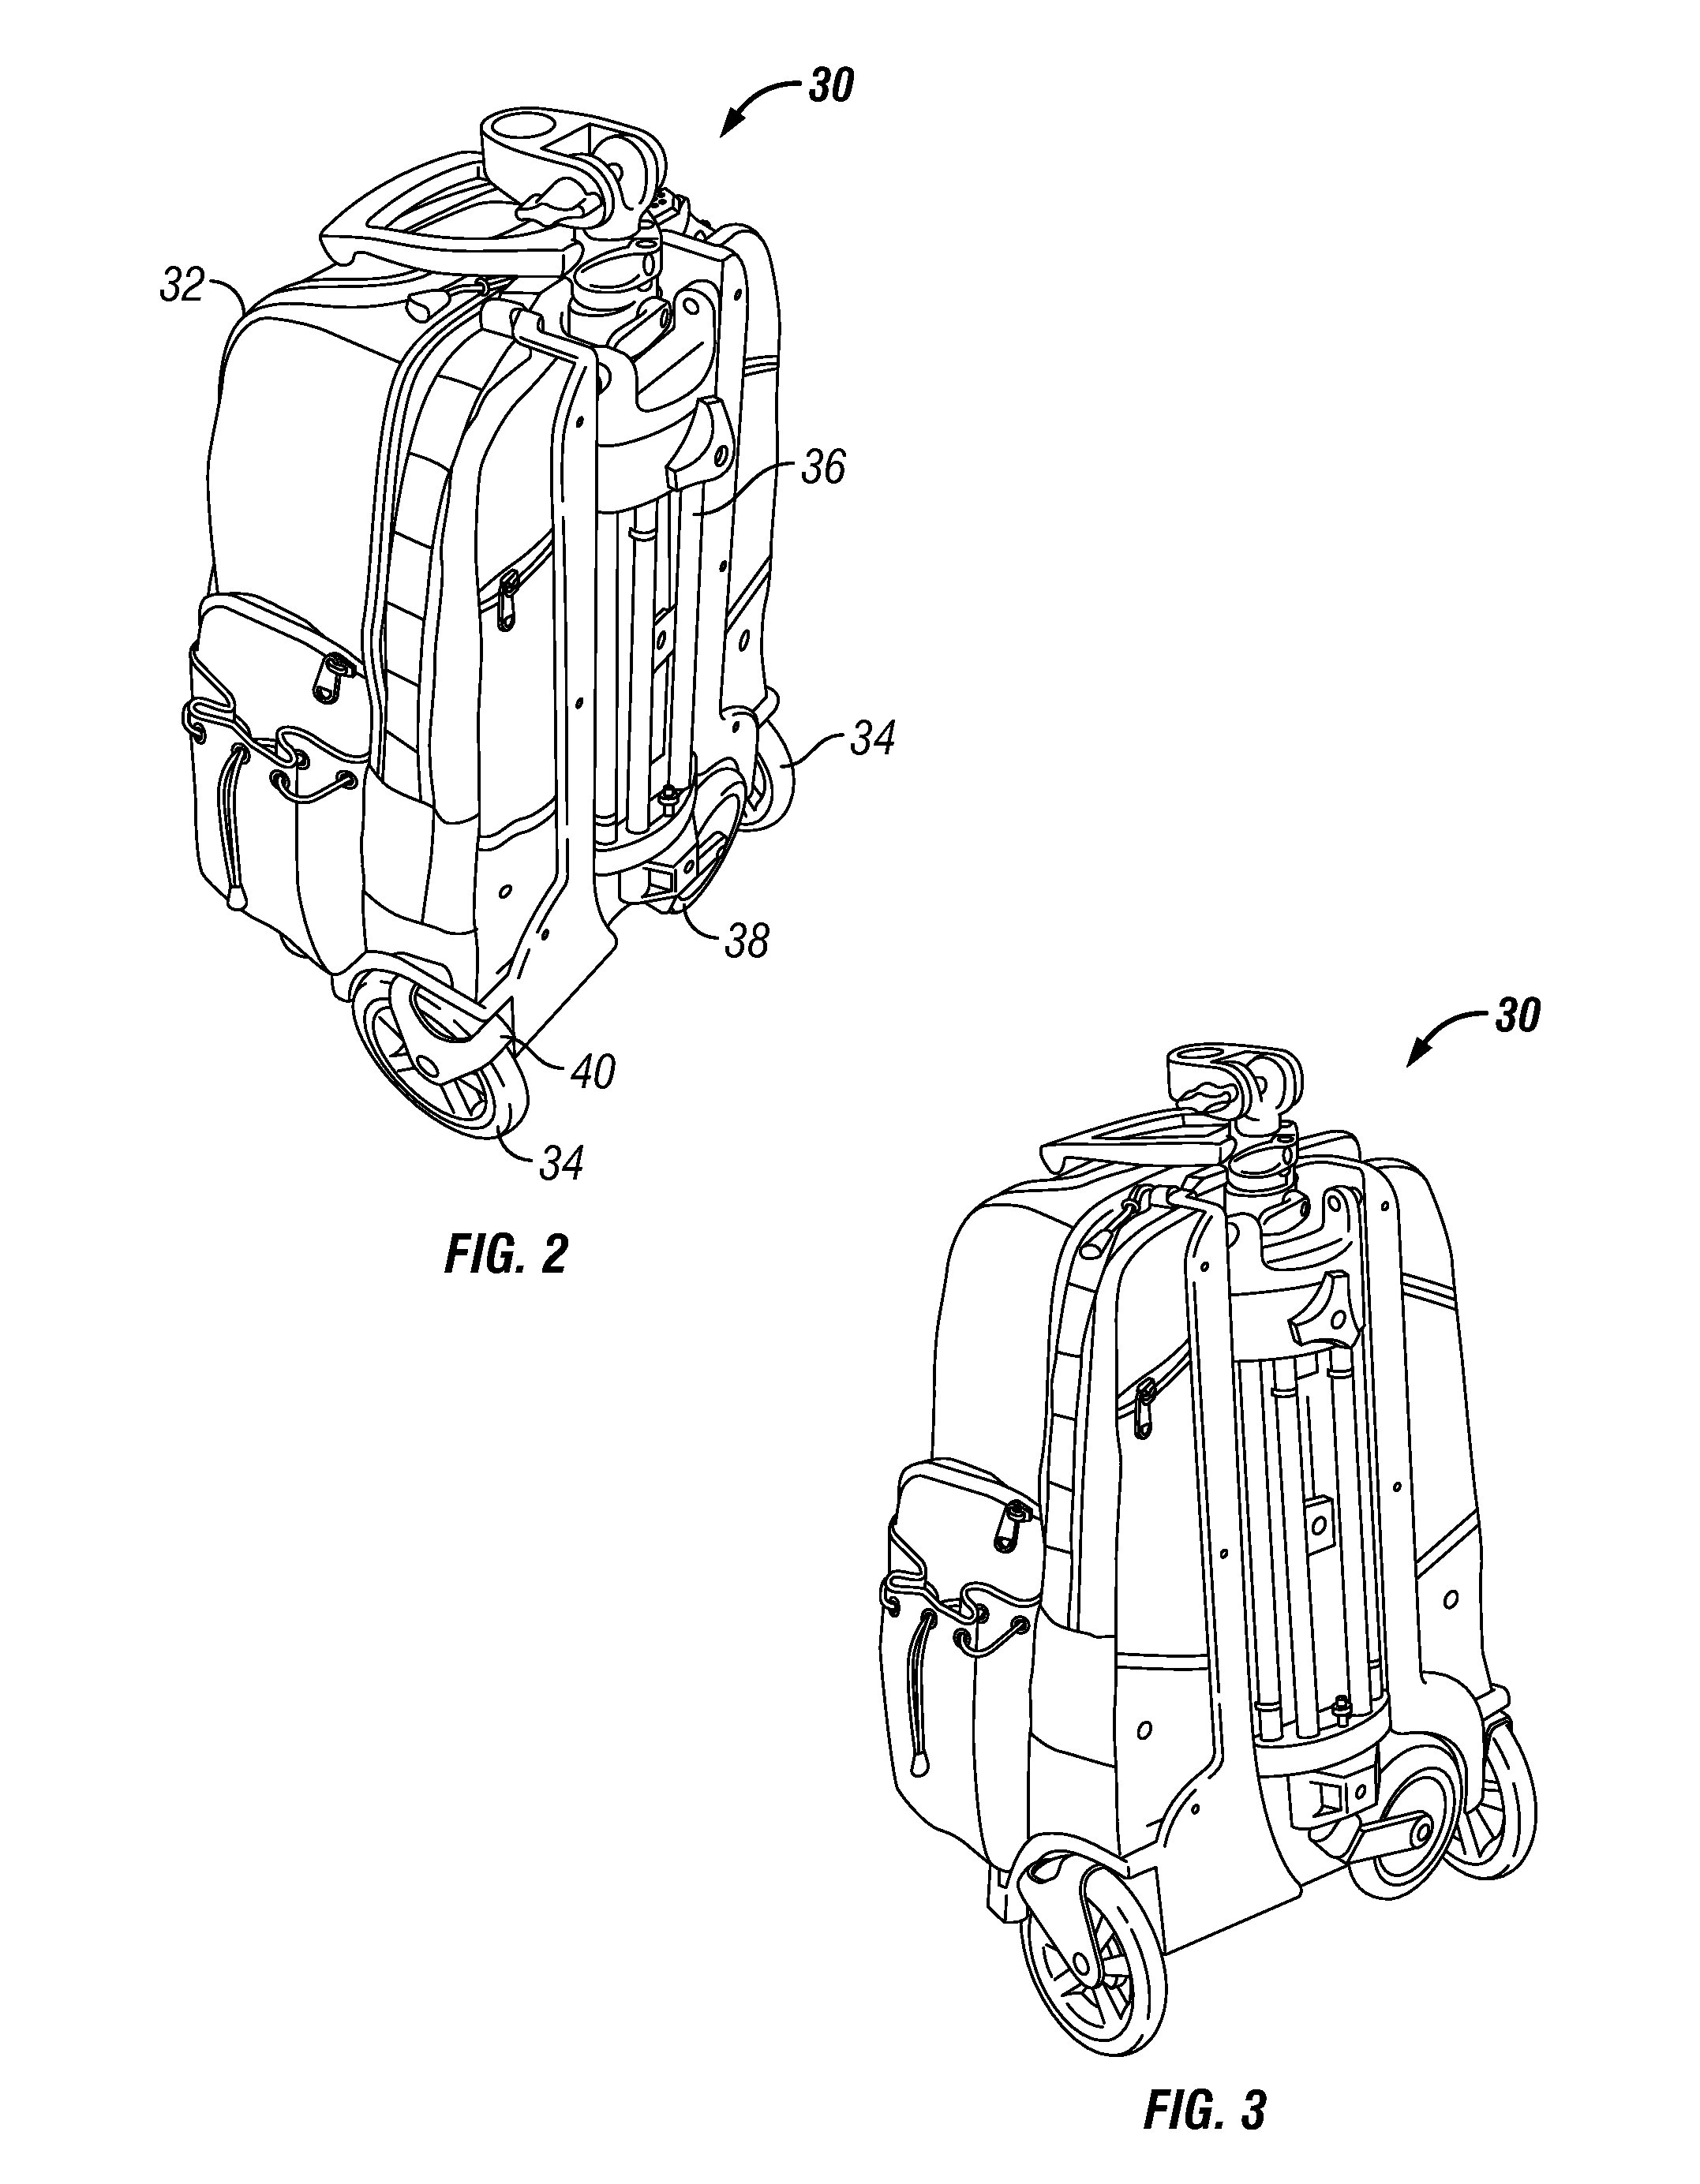 Multifunctional device support and transport apparatus